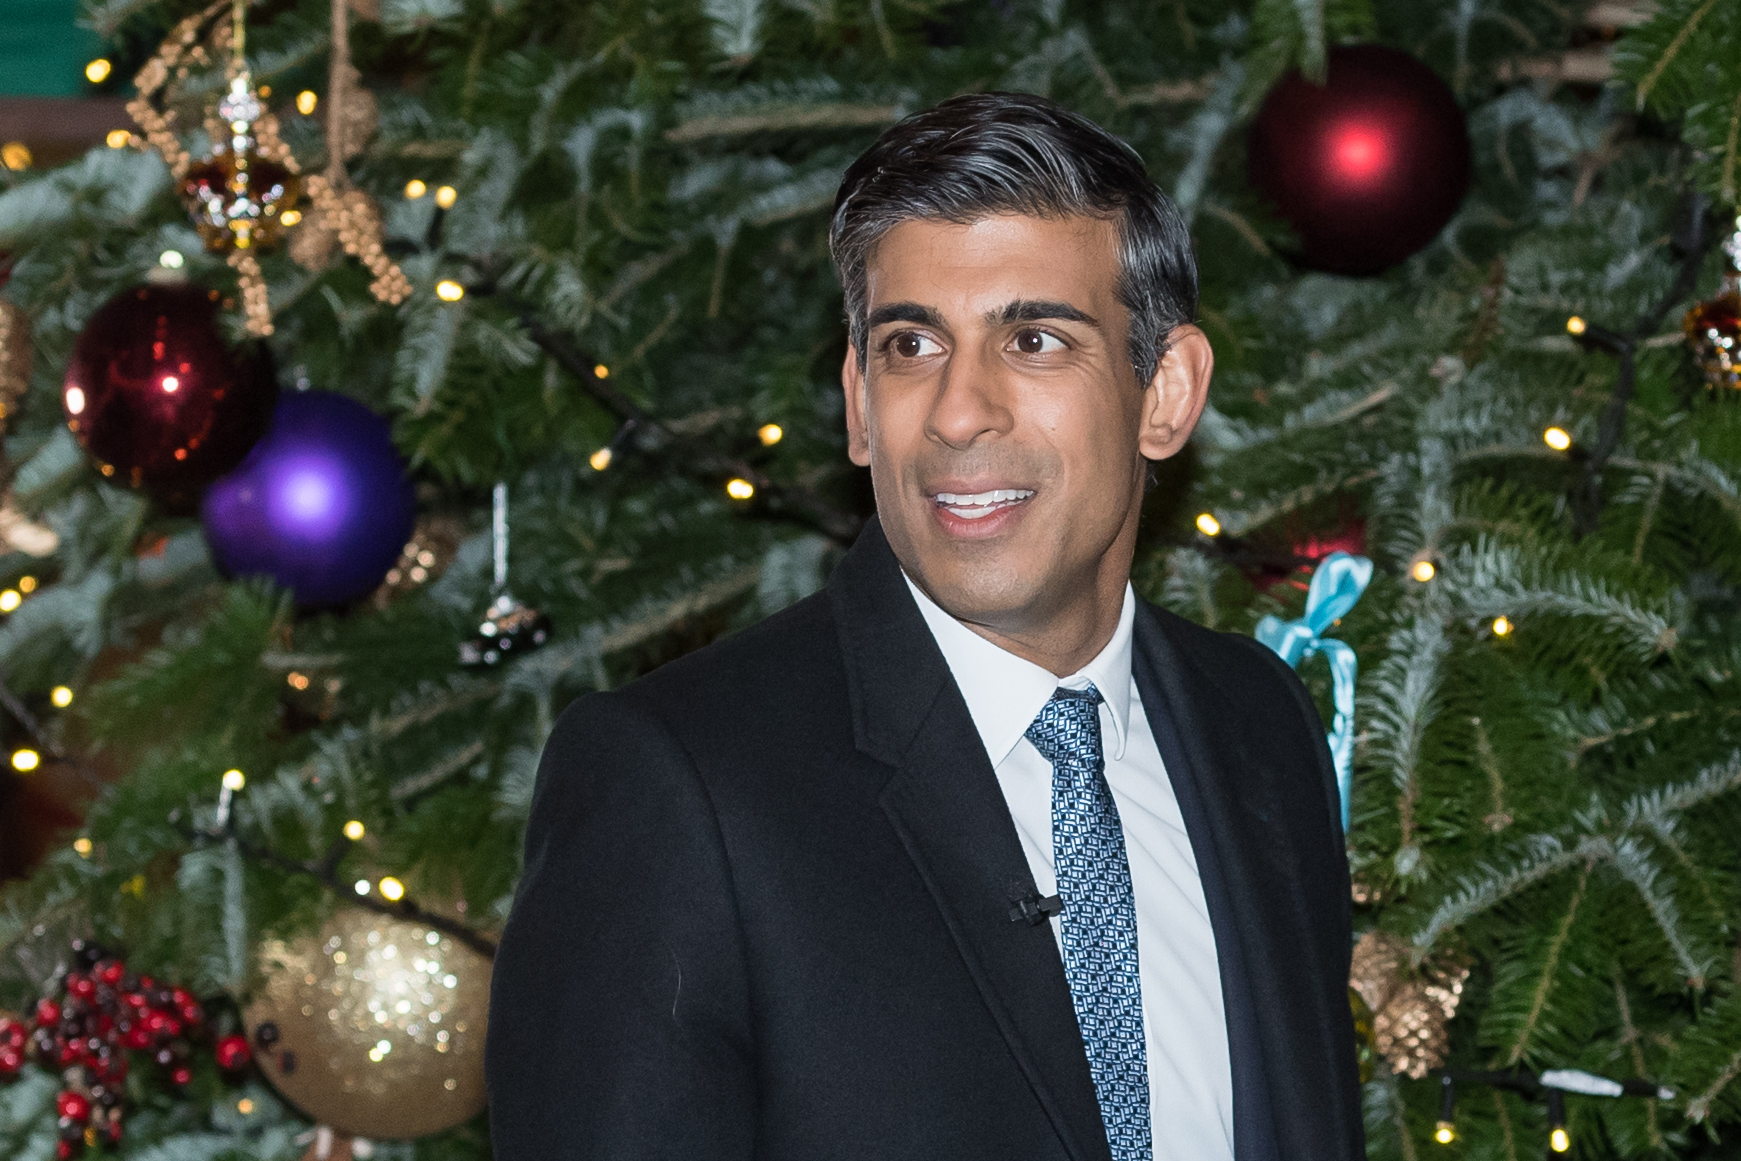 December, 2022: Rishi stands in front of a Christmas Tree while hosting a festive market for small businesses in Downing Street